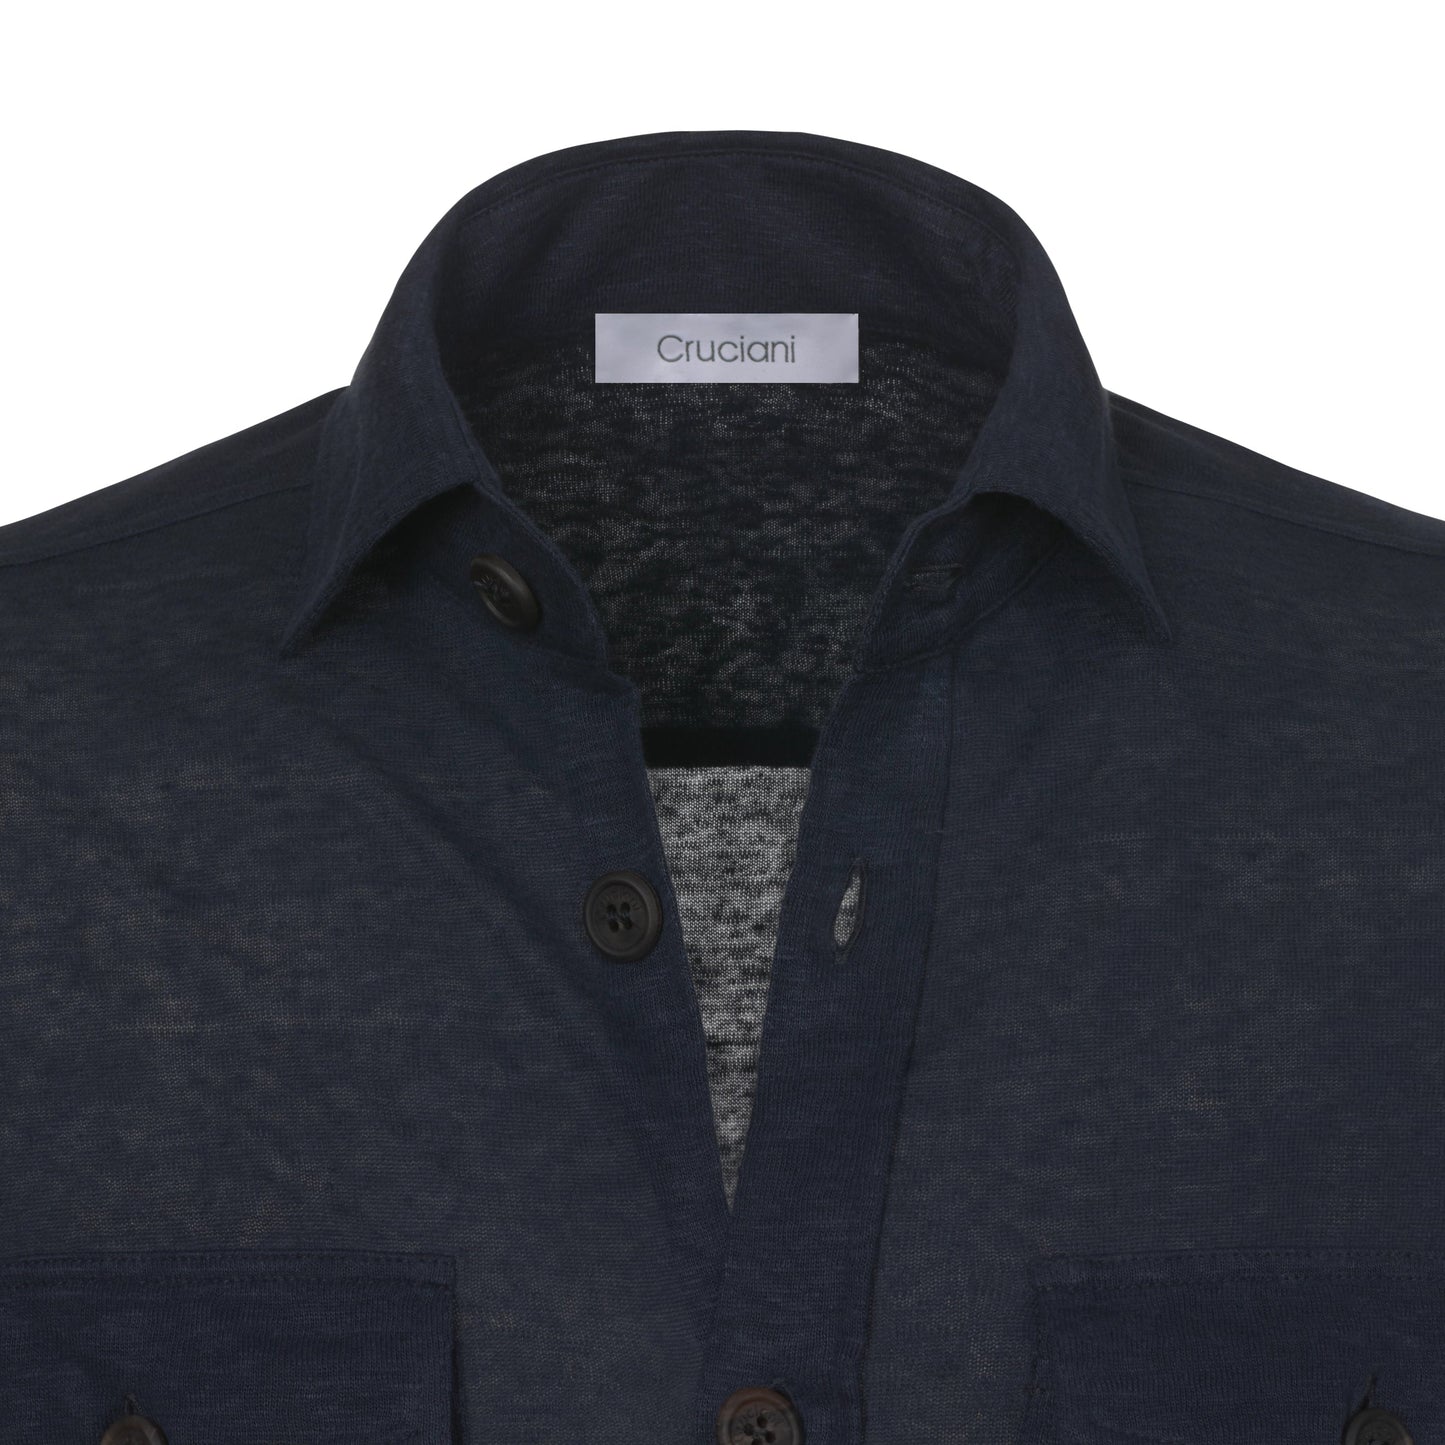 Cruciani Cotton Shirt with Patch Pockets in Dark Blue - SARTALE